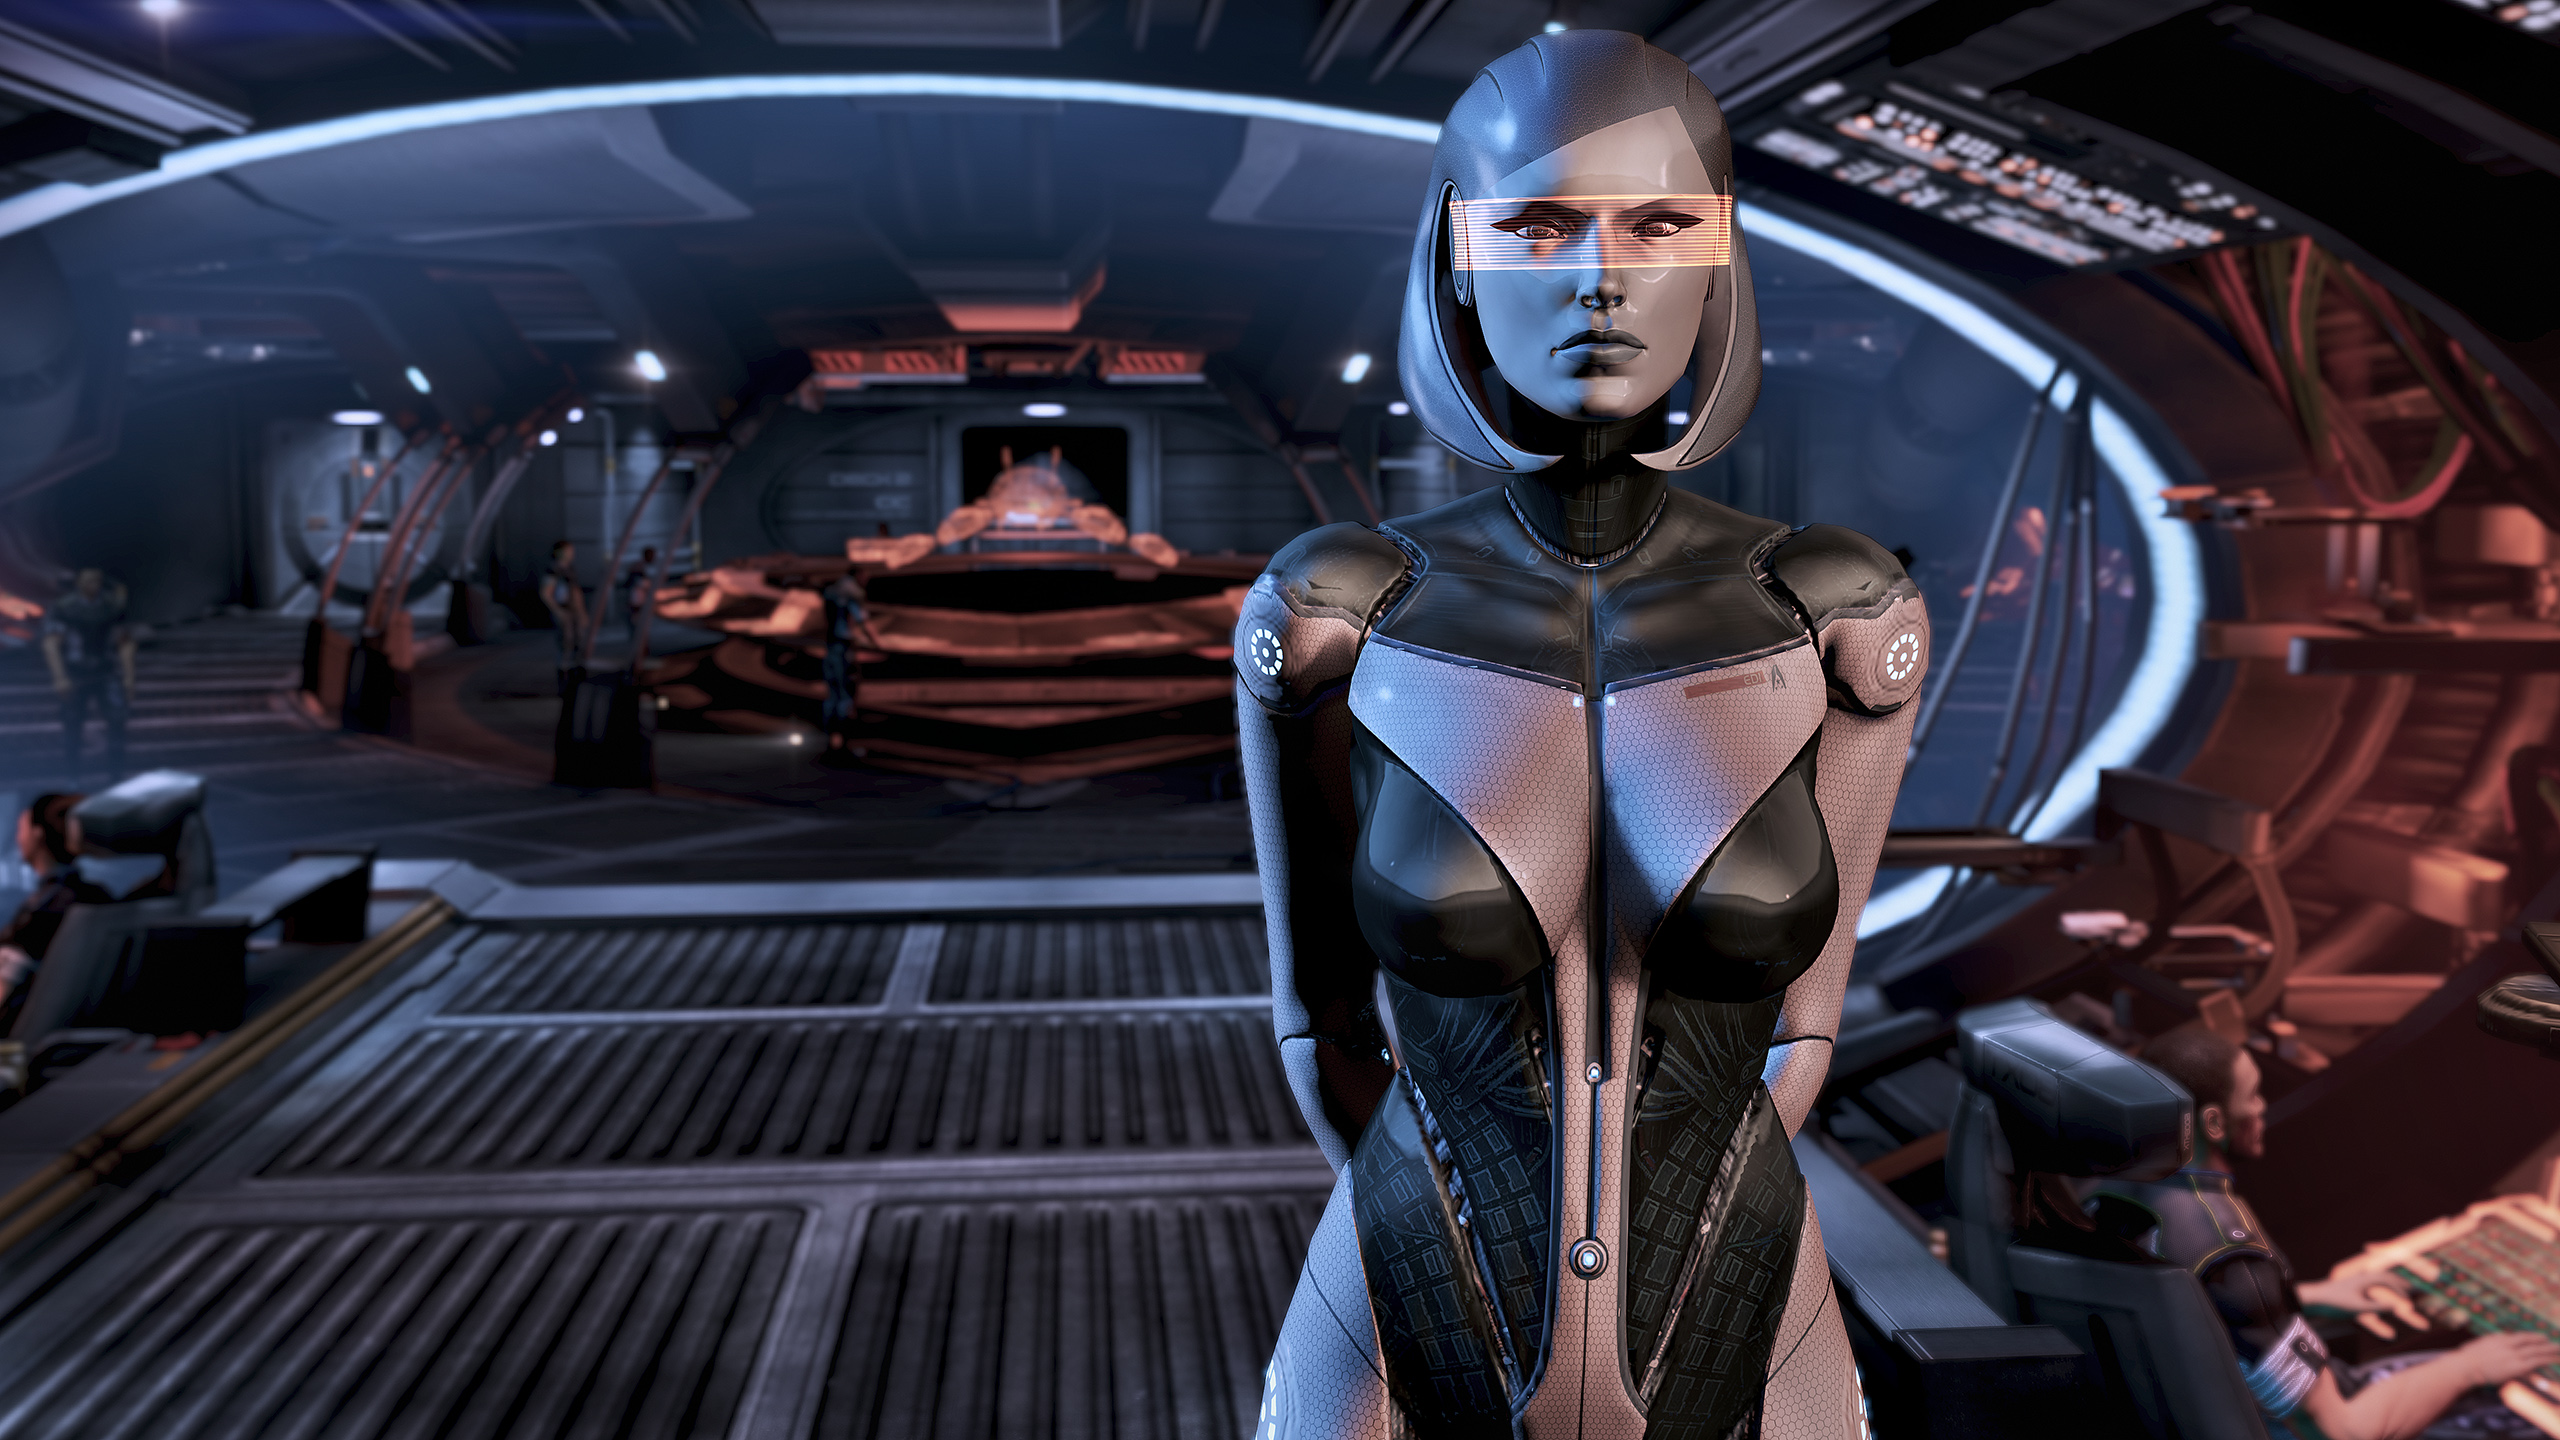 General 2560x1440 Mass Effect EDI science fiction Mass Effect 3 video game characters CGI video games